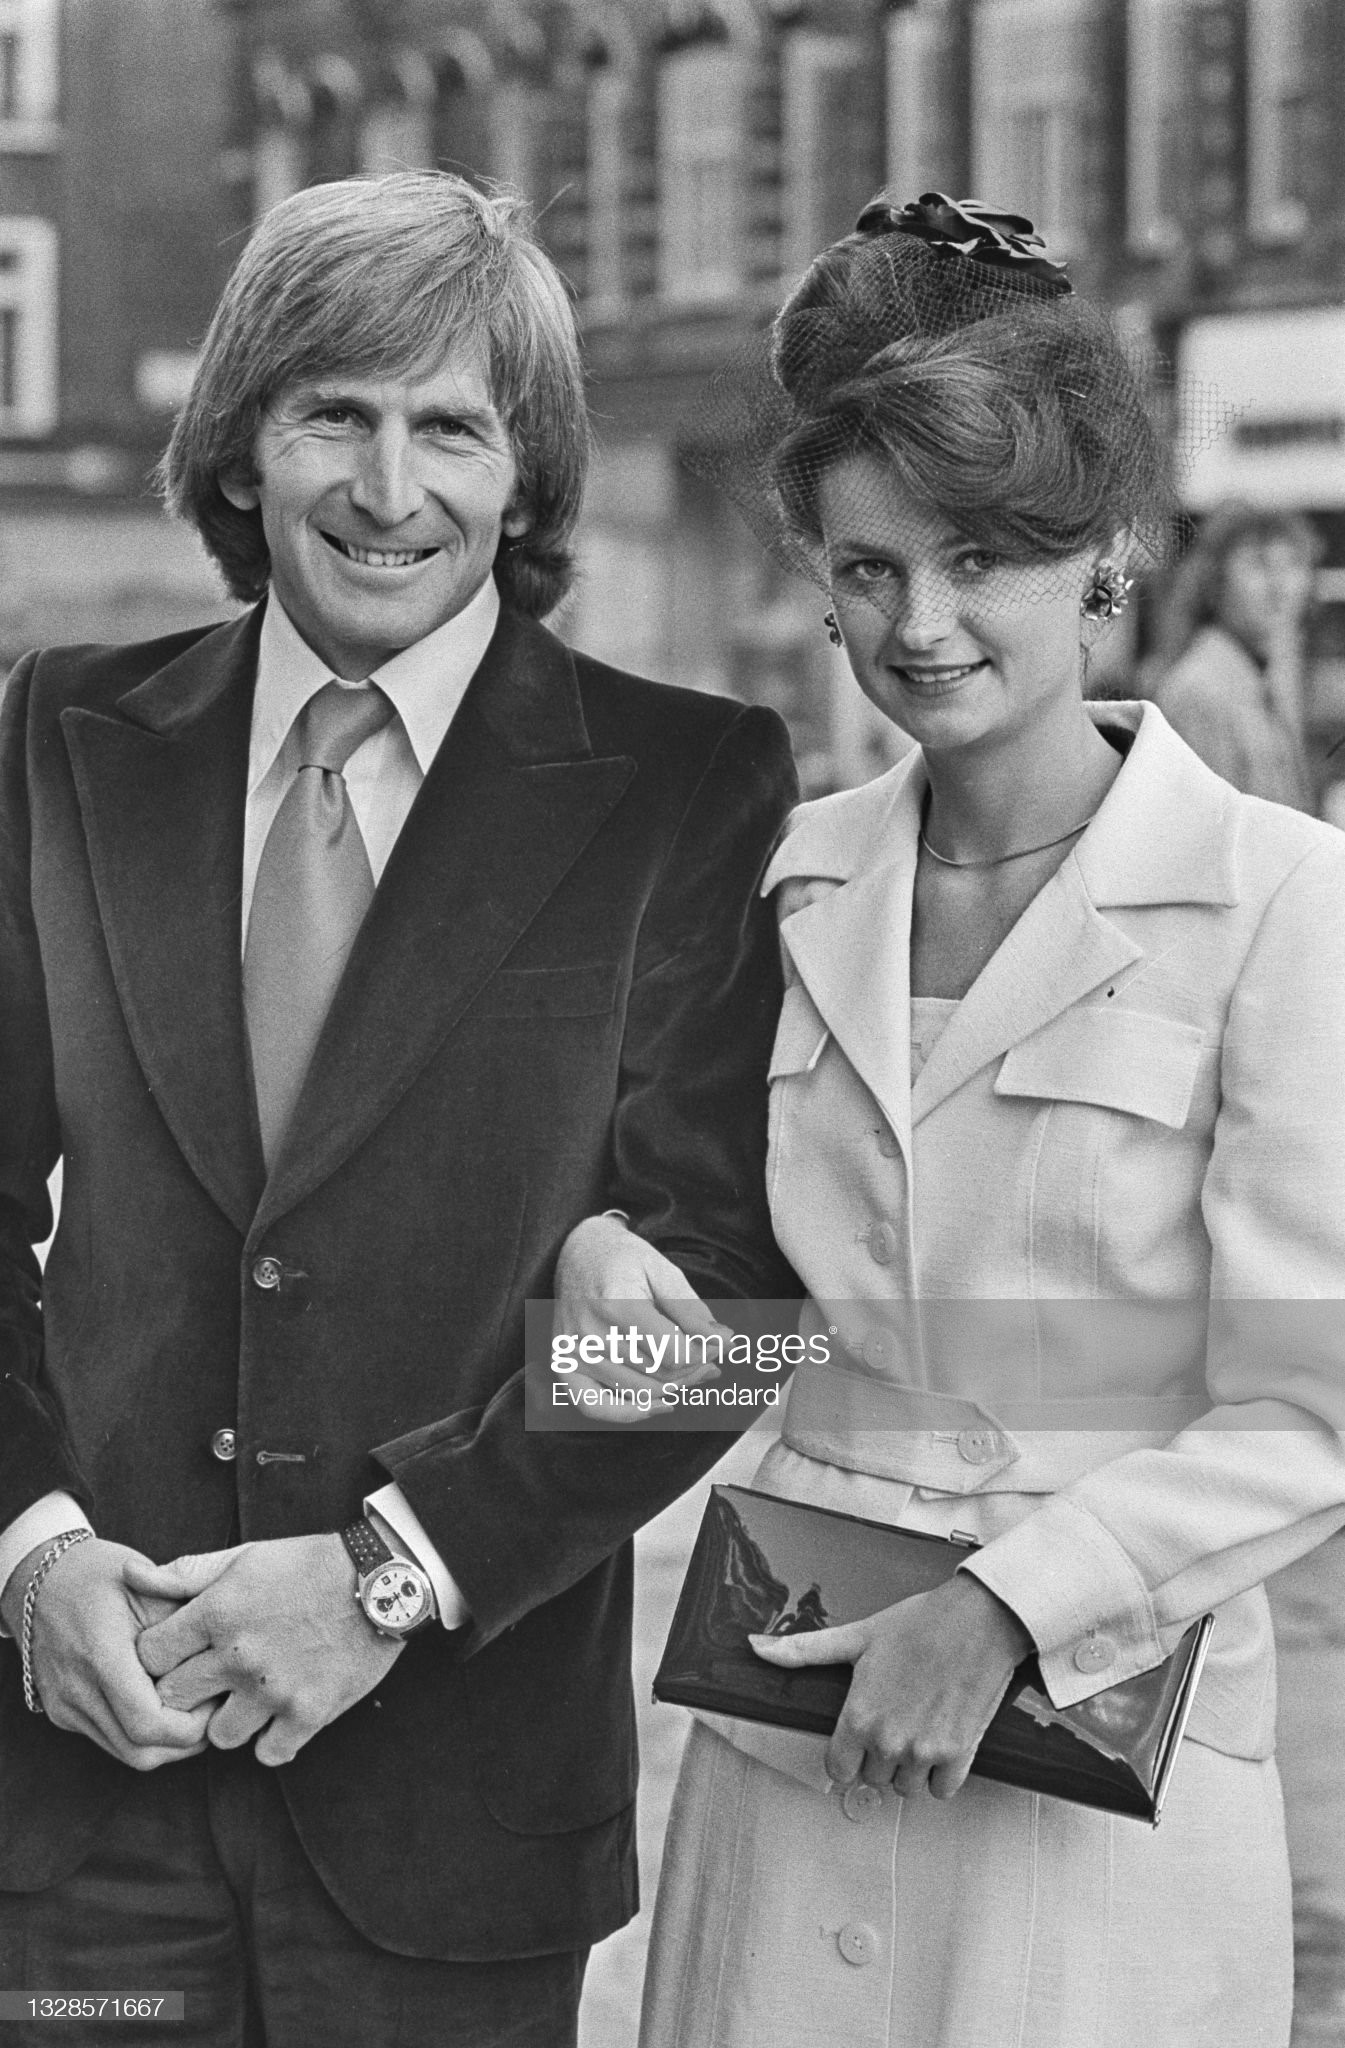 British racing driver Derek Bell and his wife Pam attend the wedding of British racing driver James Hunt and model Suzy Miller at Brompton Oratory in London, UK, 18th October 1974.